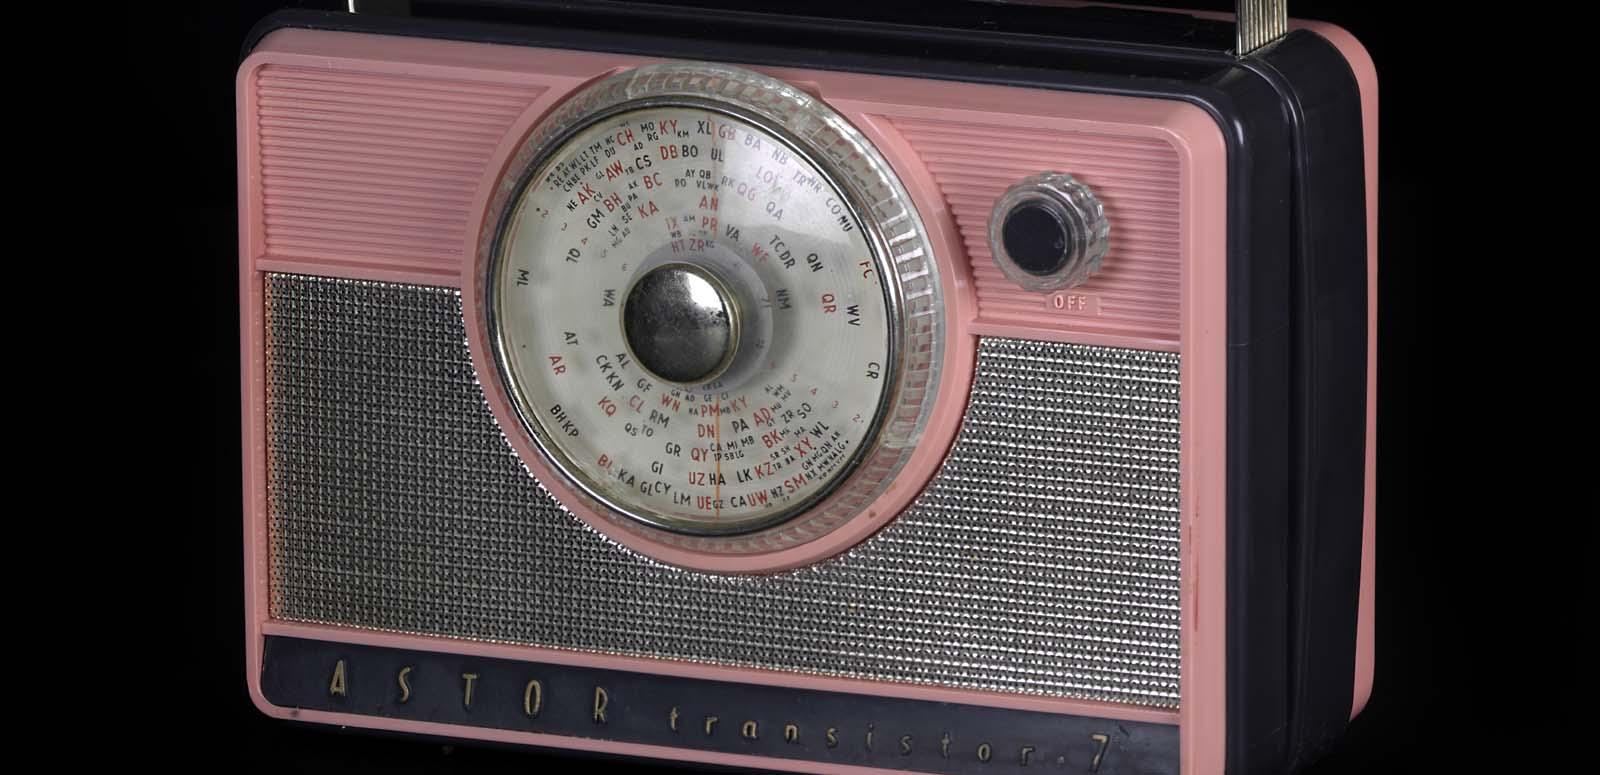 A pink and grey Astor 7 transistor radio from the 1950s or 1960s